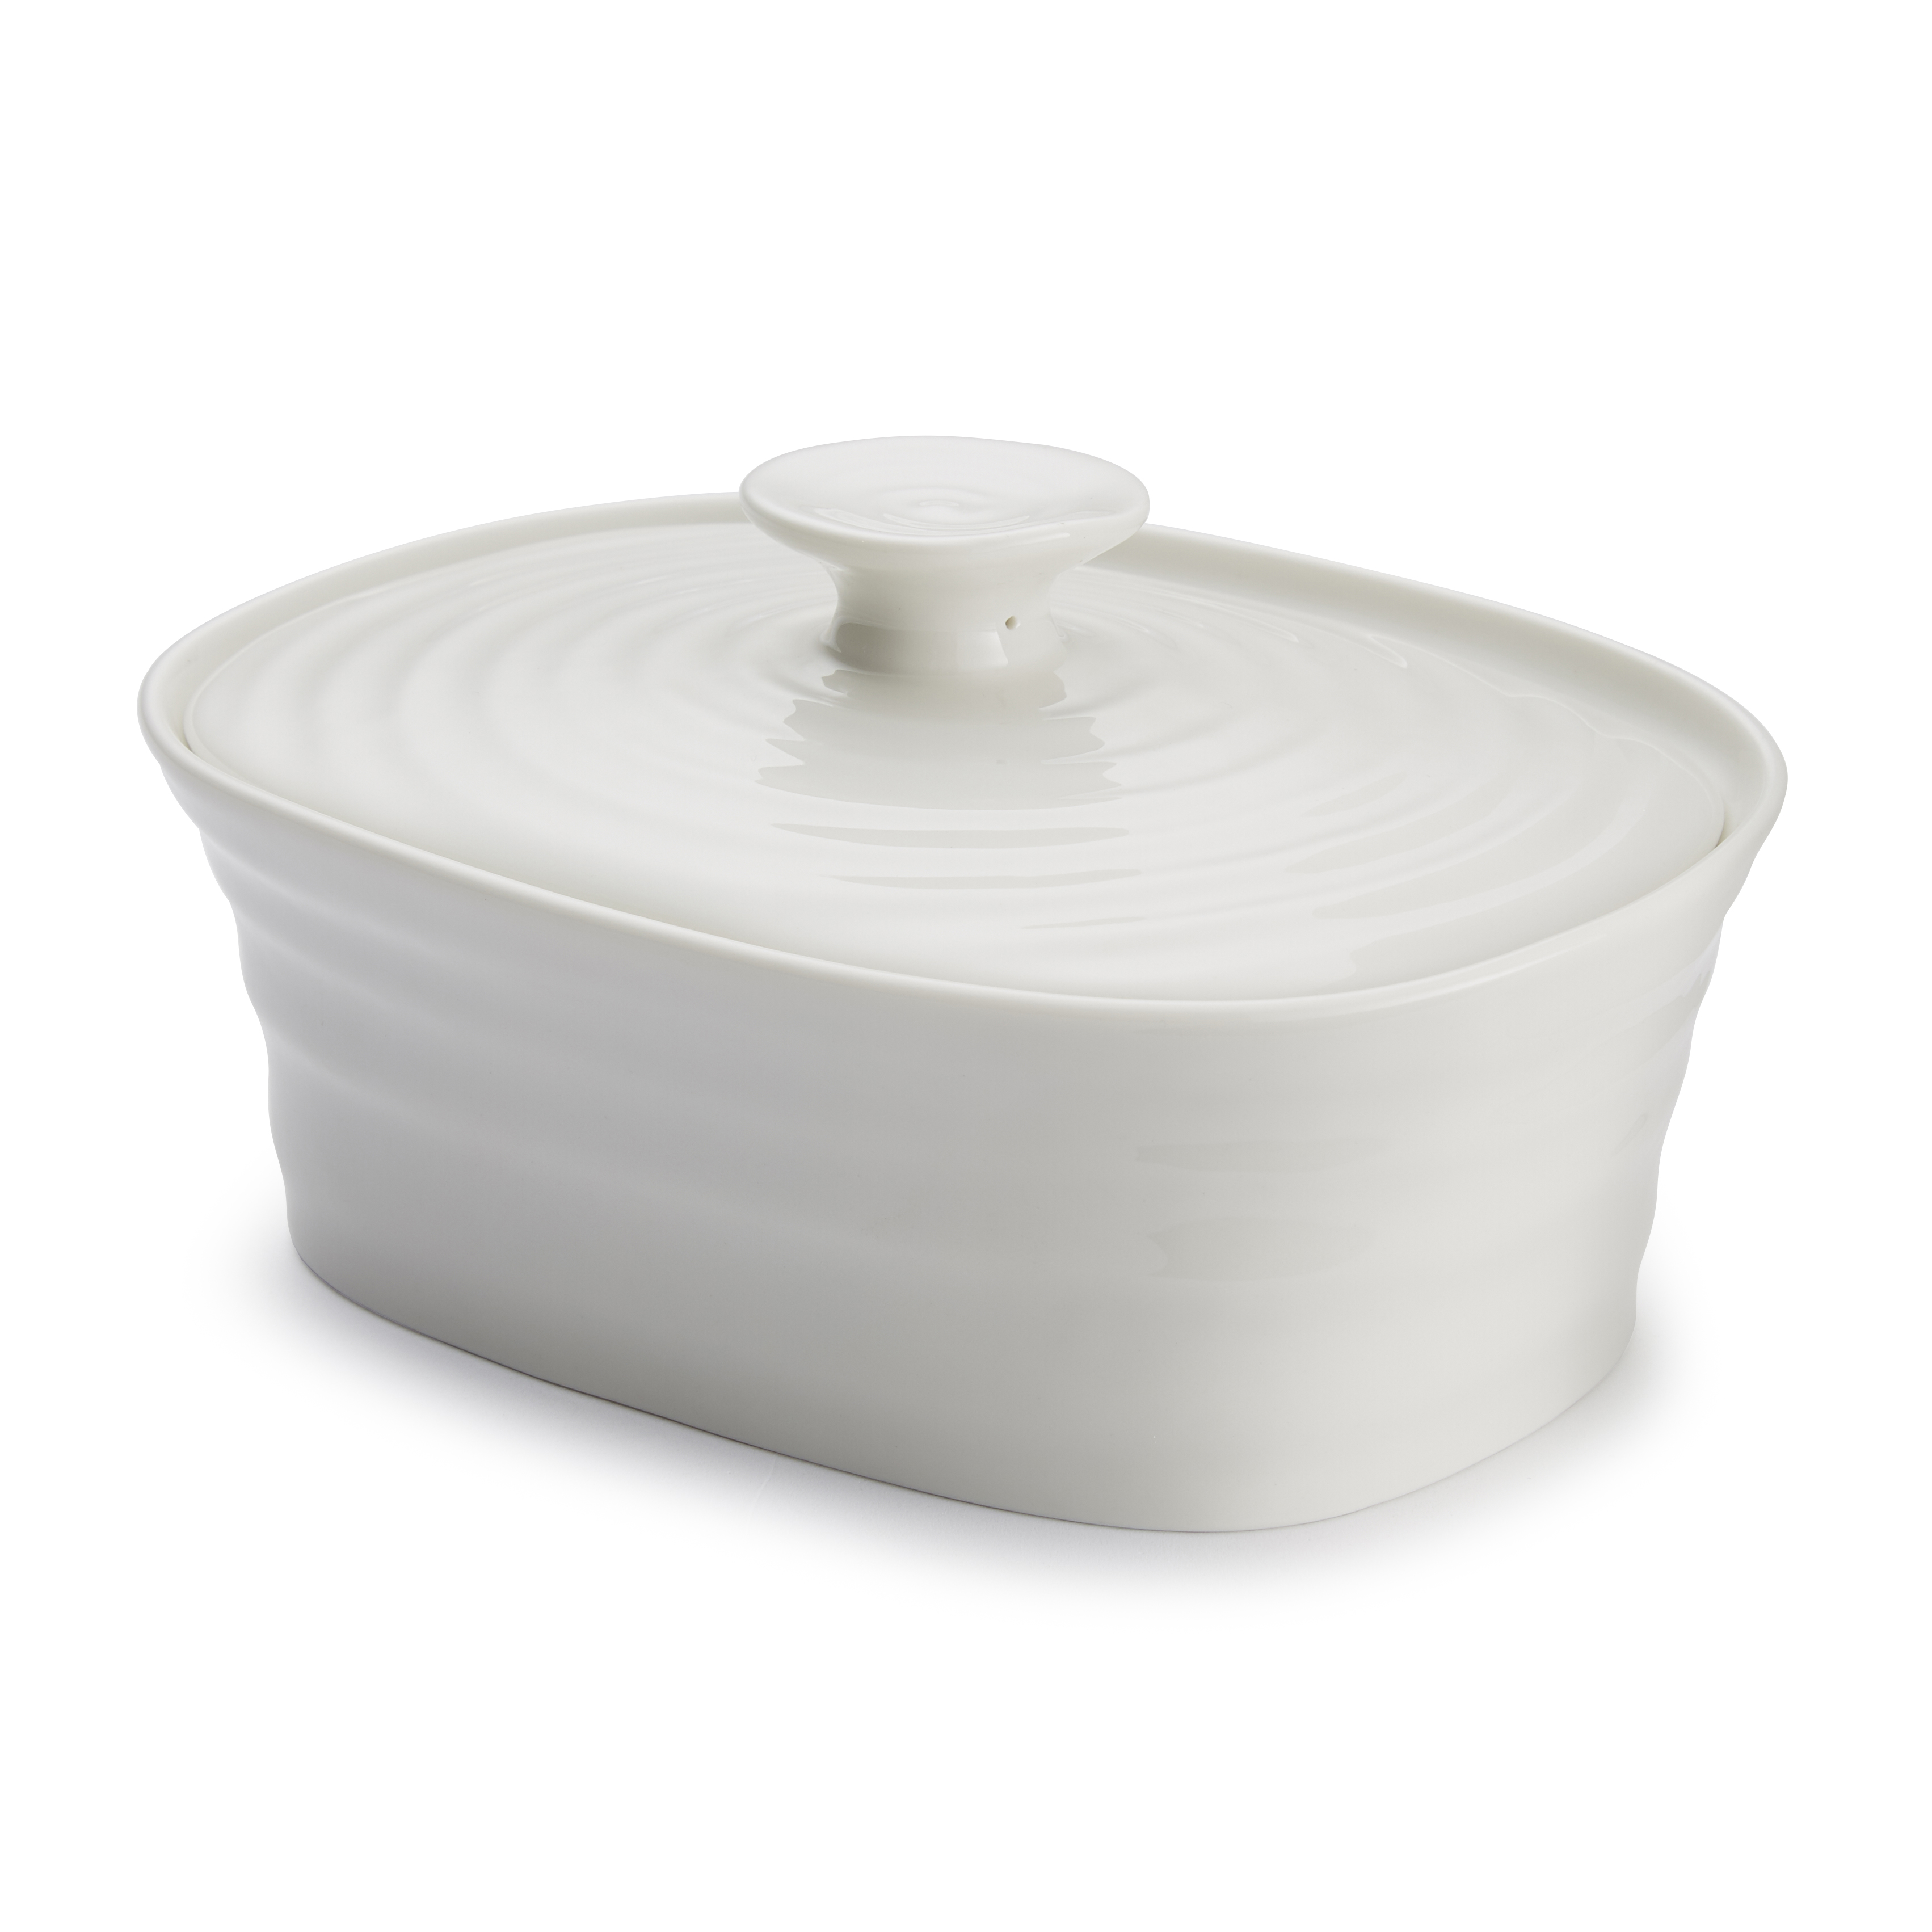 Portmeirion Sophie Conran White Covered Butter image number null